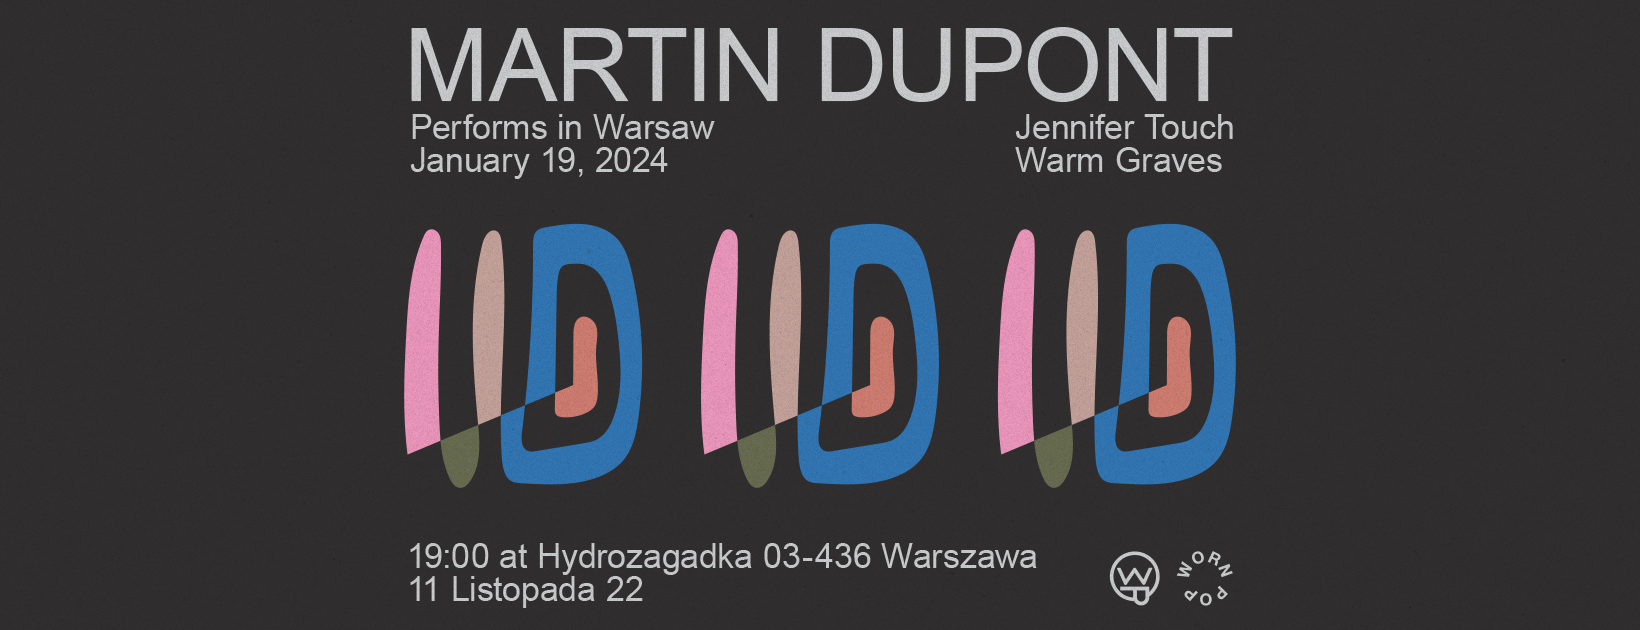 Martin Dupont live in Warsaw with Jennifer Touch and Warm Graves - Página frontal